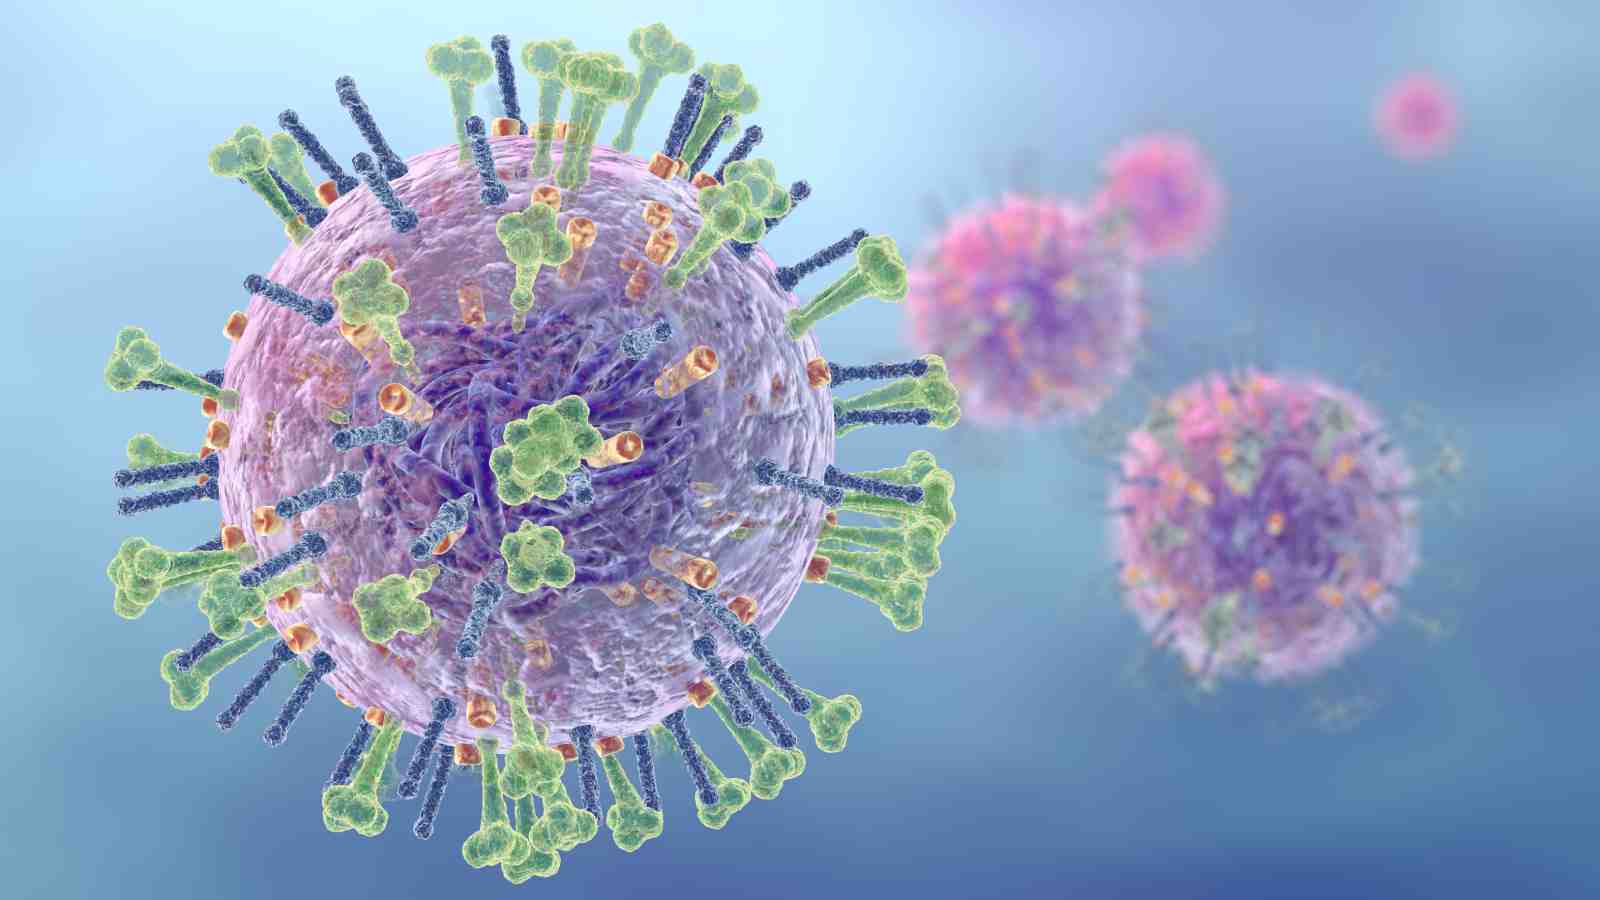 H3N2 virus takes 2 lives in India: Symptoms, precautions to know